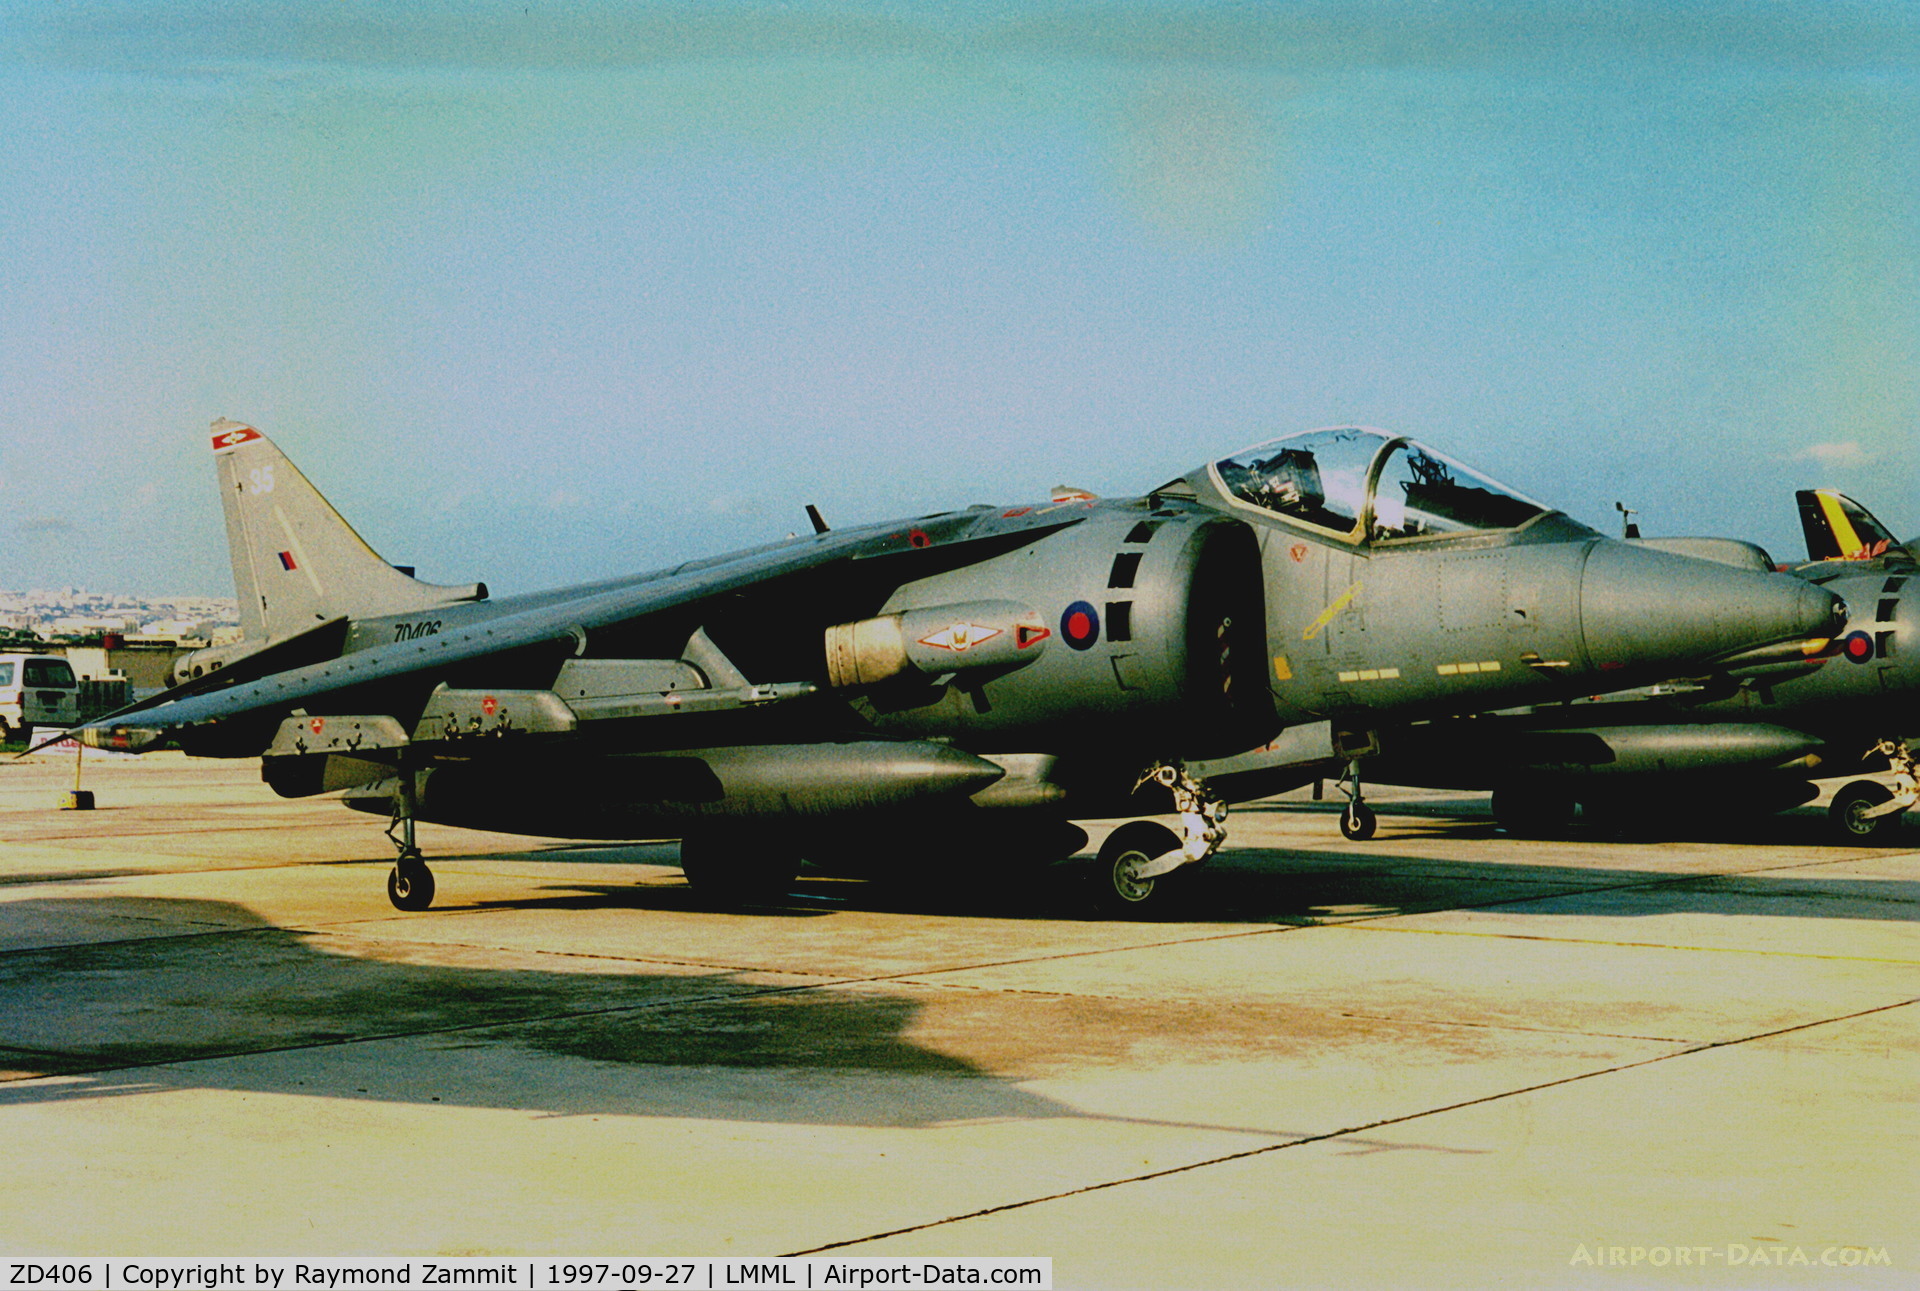 ZD406, 1989 British Aerospace Harrier GR.7 C/N P35, Bae Harrier GR.7 ZD406/35 of No 1Sqdn Royal Air Force seen here while participating in the Malta International Airshow 1997.